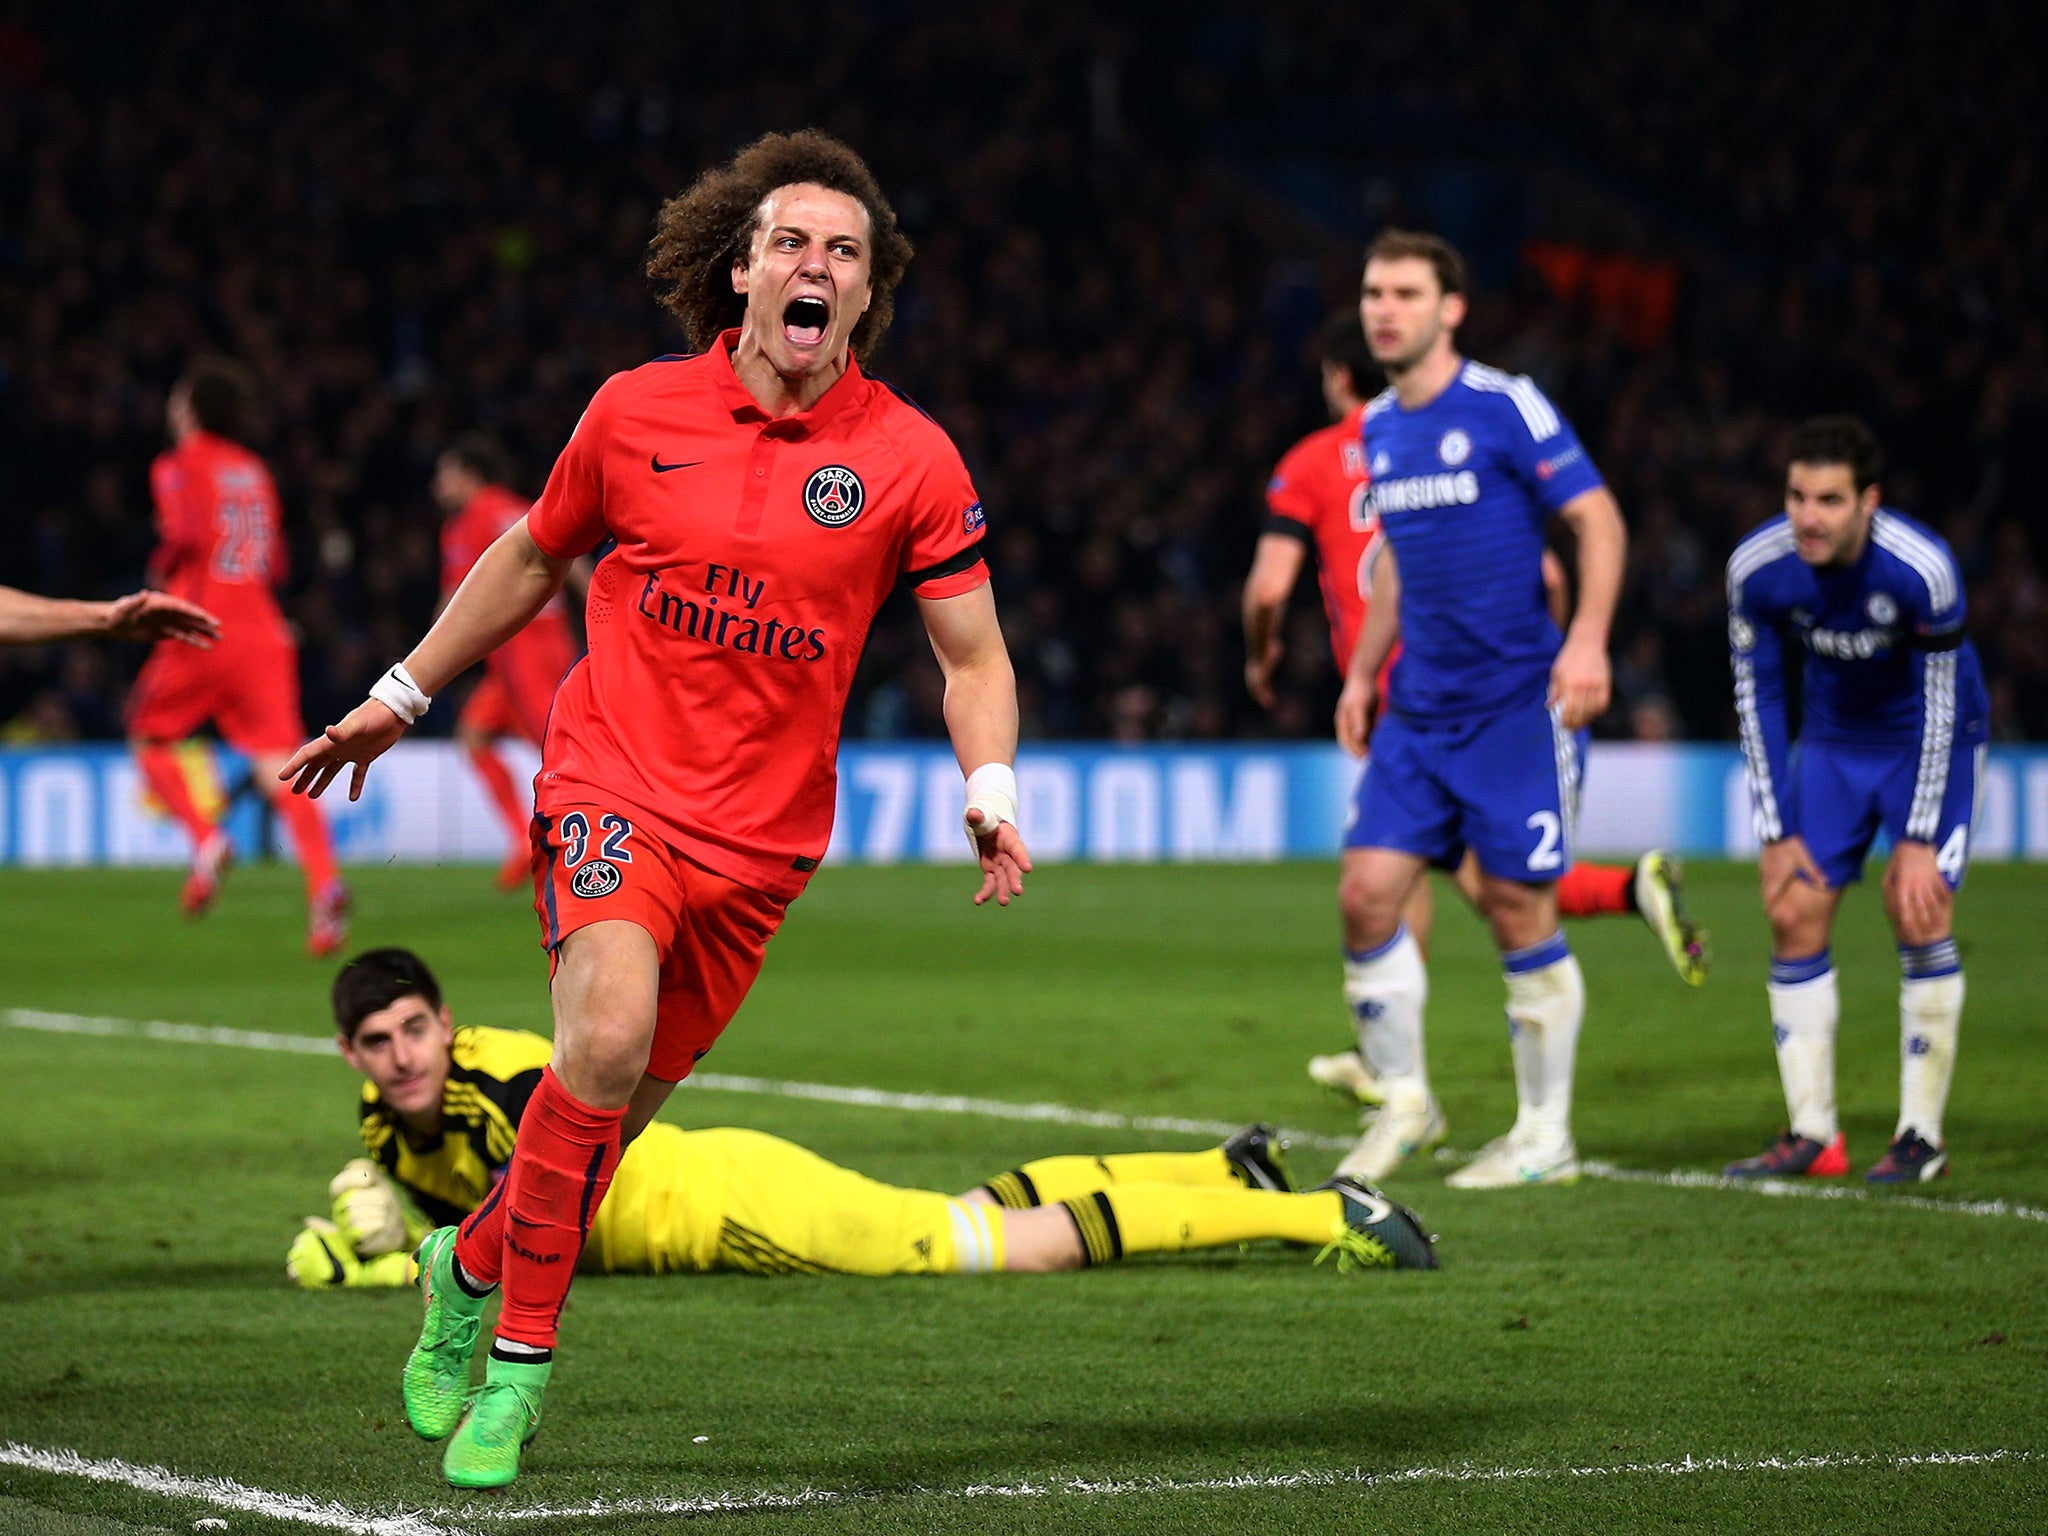 David Luiz scored a crucial away goal in extra time against Chelsea in 2015